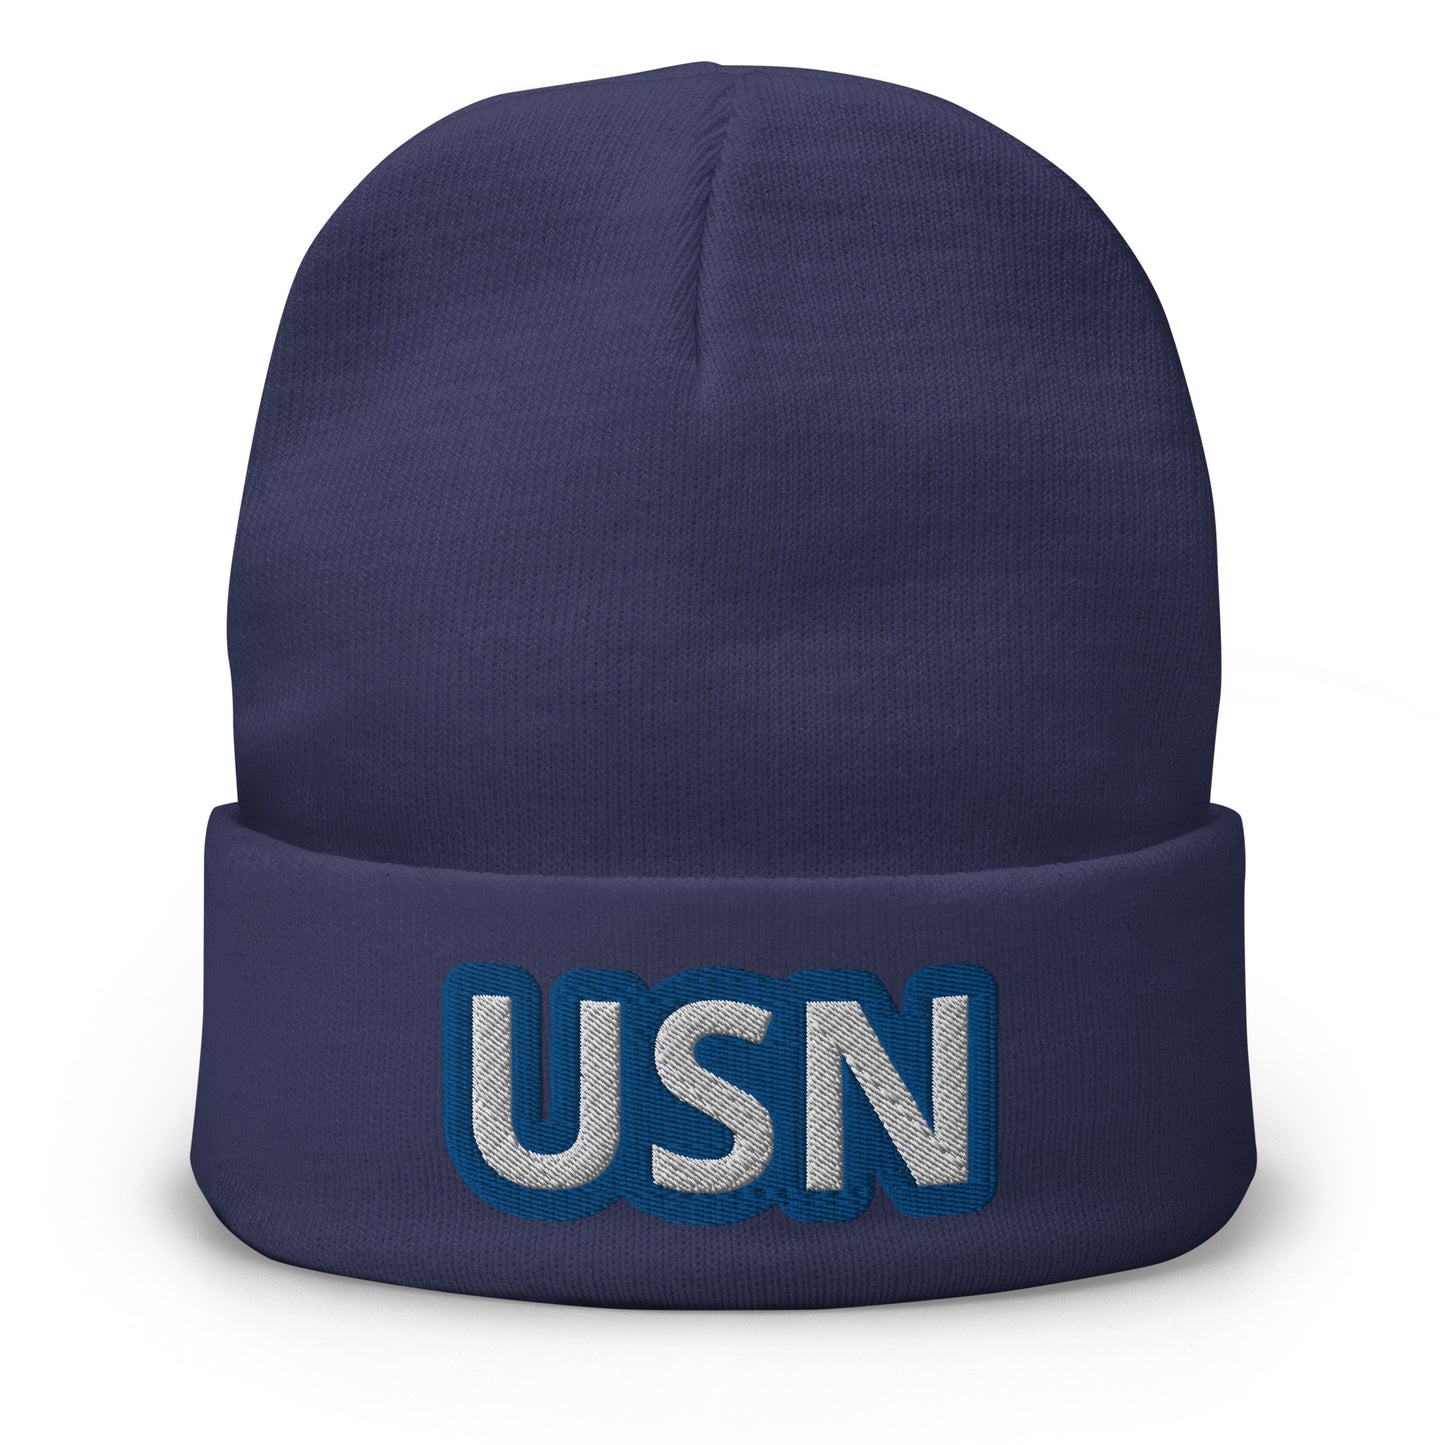 US NAVY Embroidered Beanie